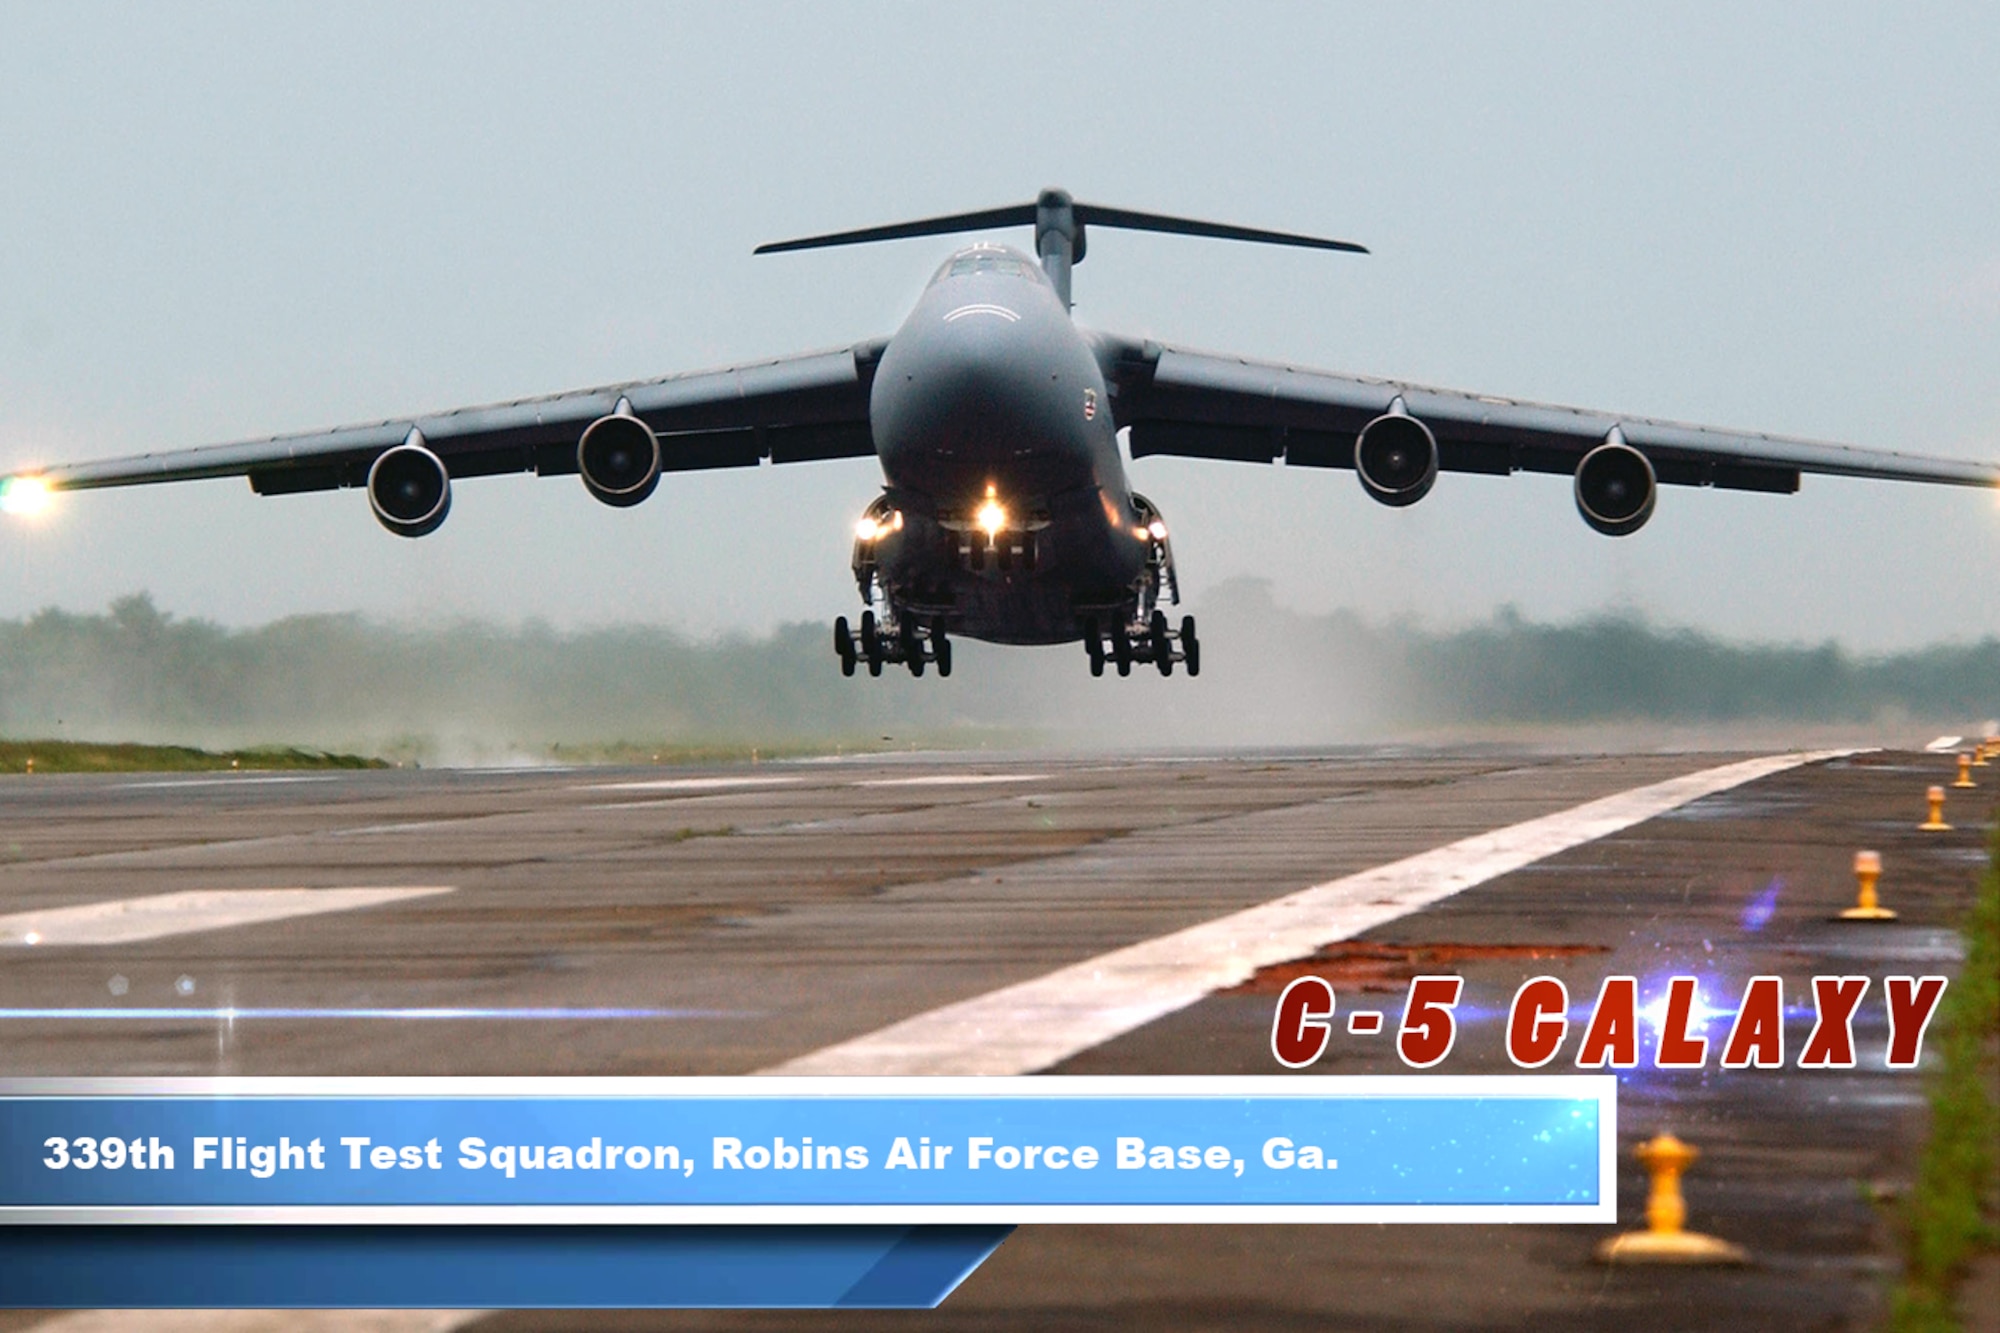 The C-5 Galaxy is one of the largest aircraft in the world and the largest airlifter in the Air Force inventory. The aircraft can carry a fully equipped combat-ready military unit to any point in the world on short notice and then provide the supplies required to help sustain the fighting force.